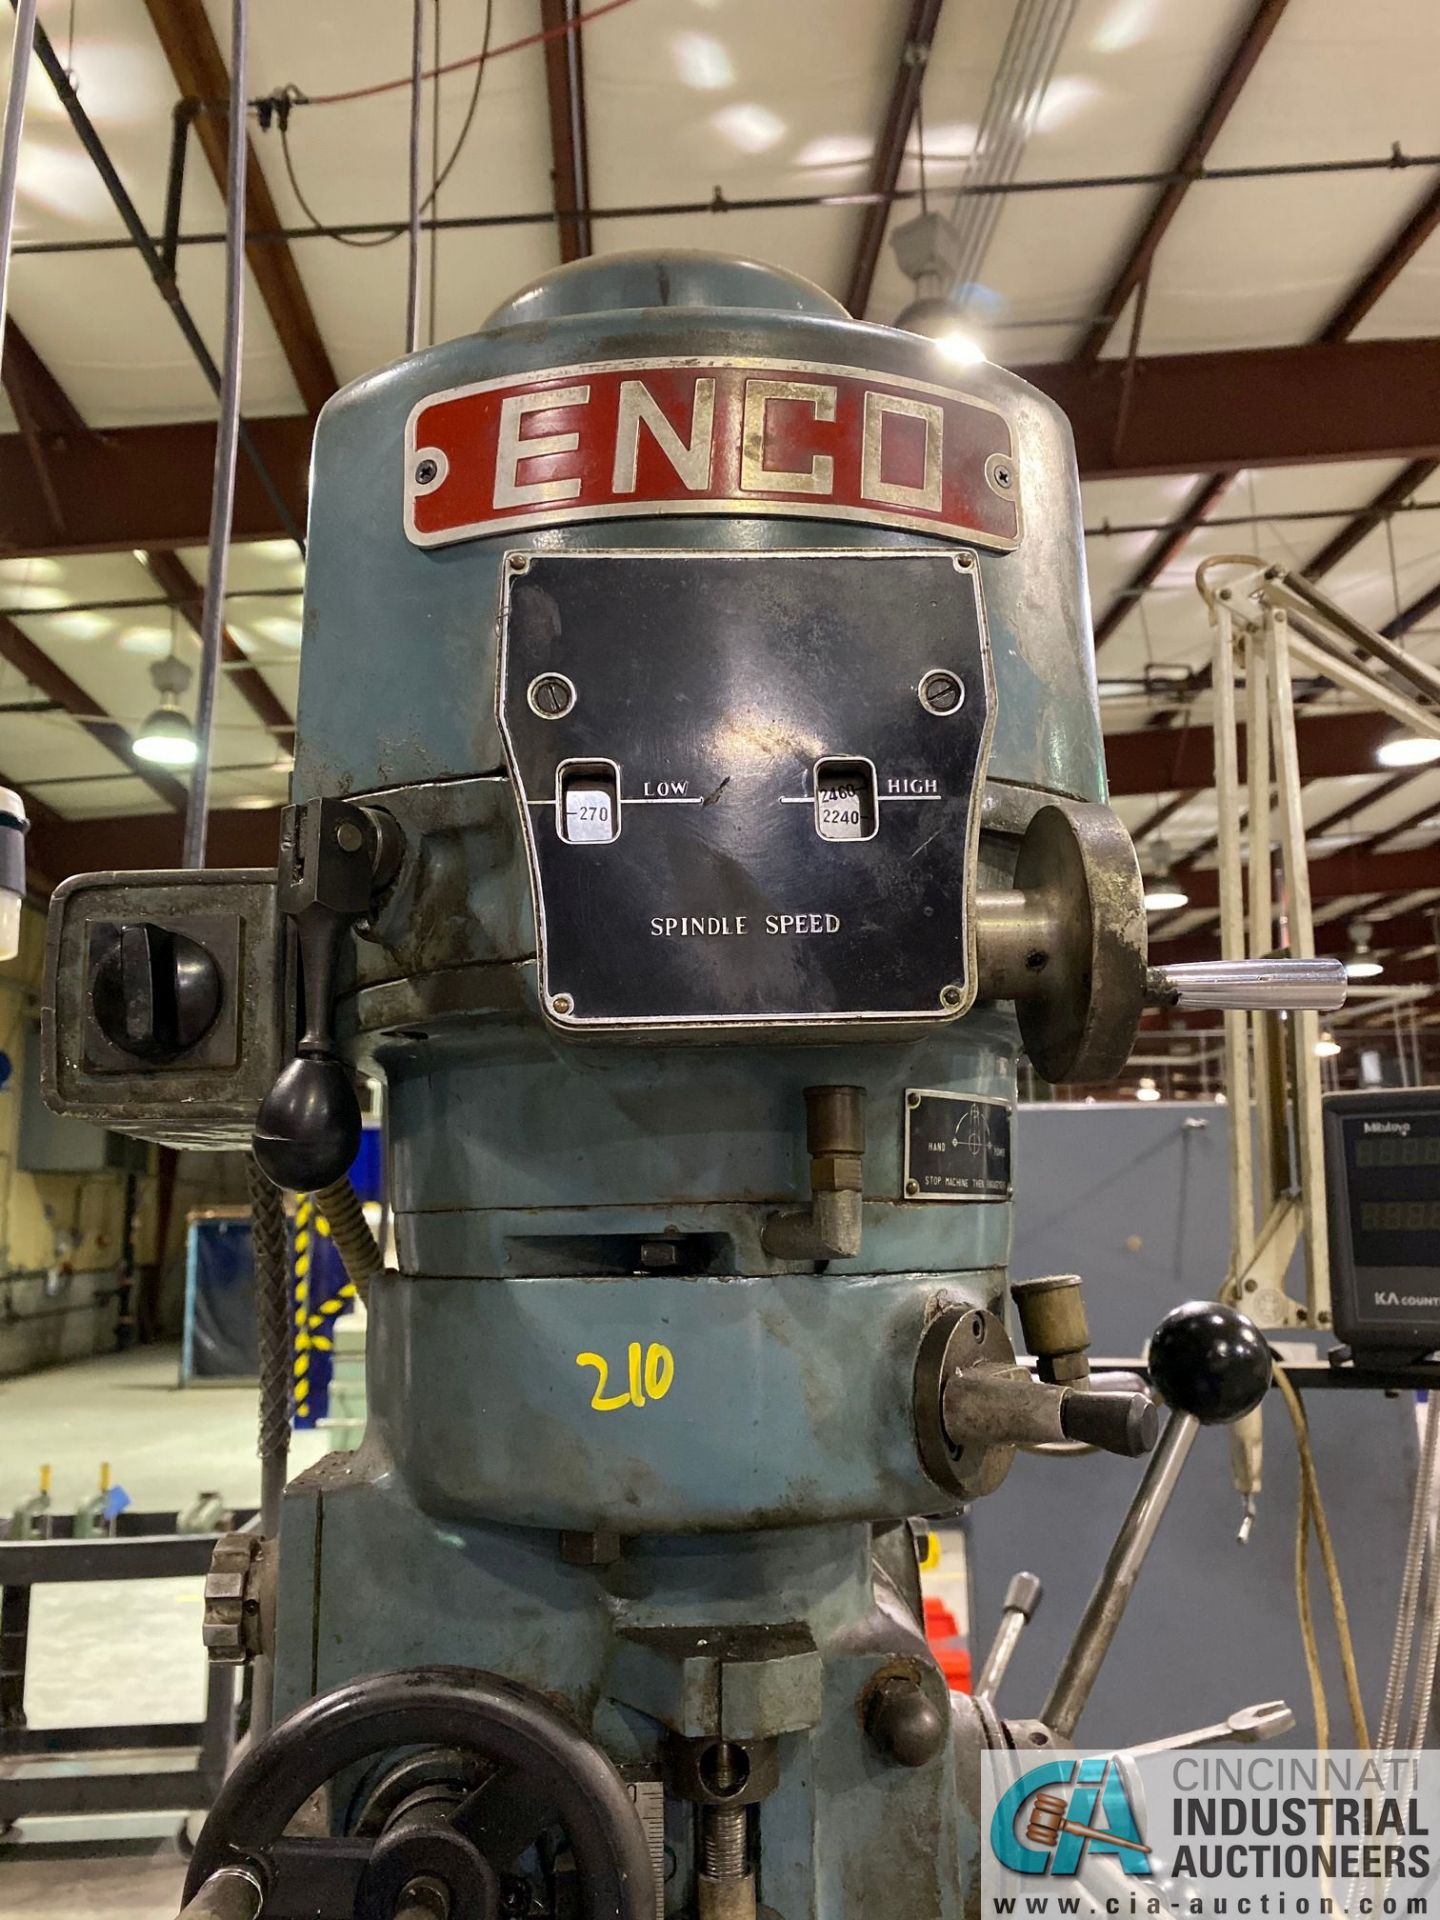 2 HP ENCO MODEL 100-1529 VERTICAL MILL; S/N 441359, 7" X 42" POWER TABLE, SPINDLE SPEED 60-4200 RPM, - Image 5 of 7